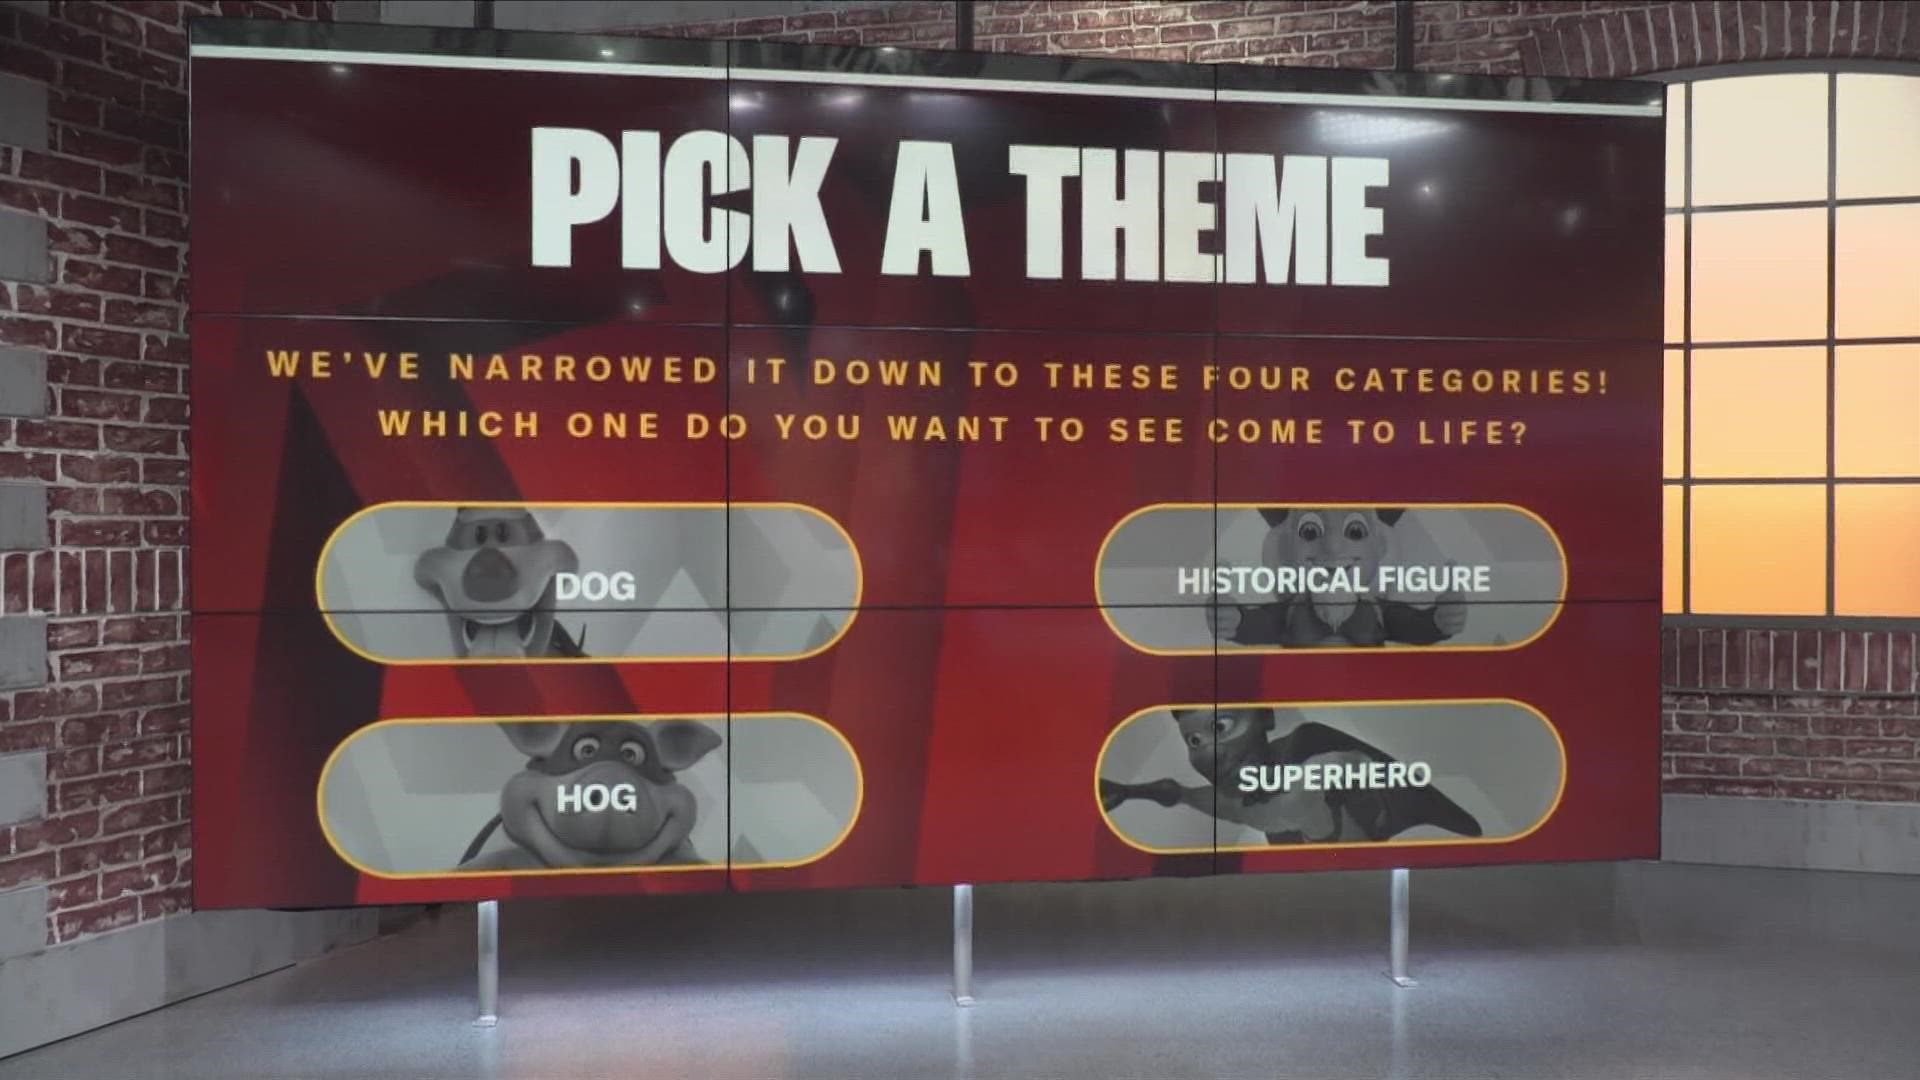 The team has narrowed the choices down the four themes.